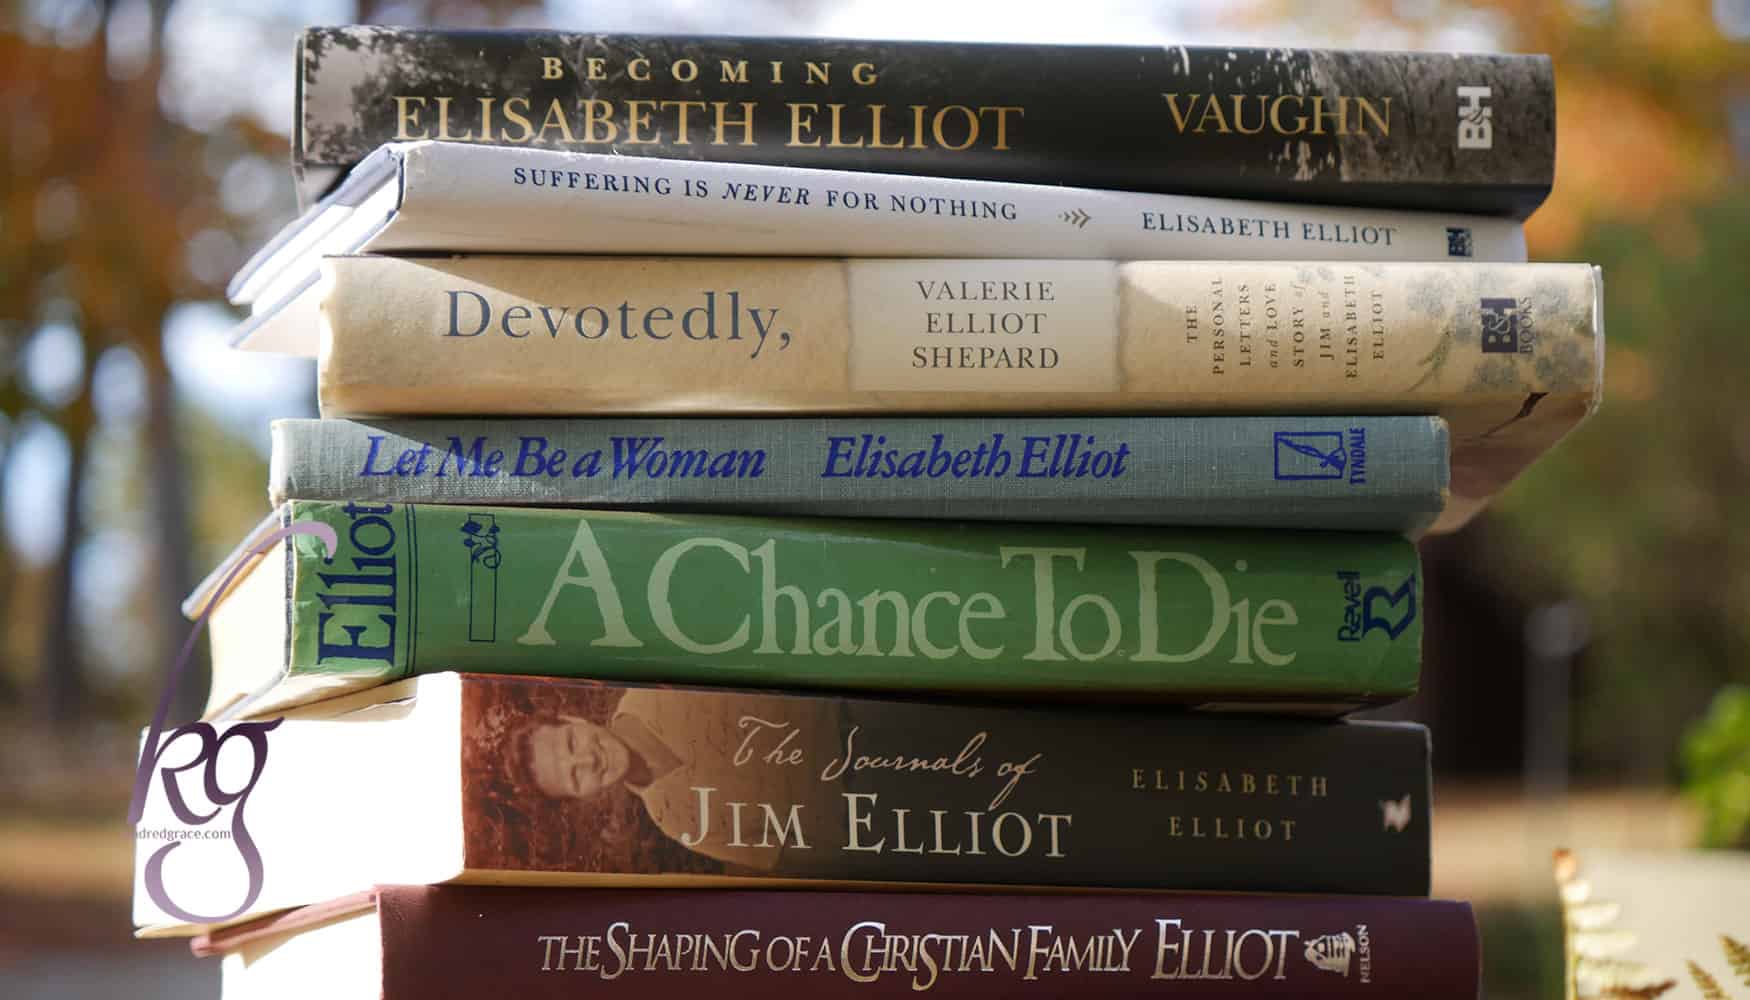 How to Build Things That Last: Truths From Elisabeth Elliot’s Books